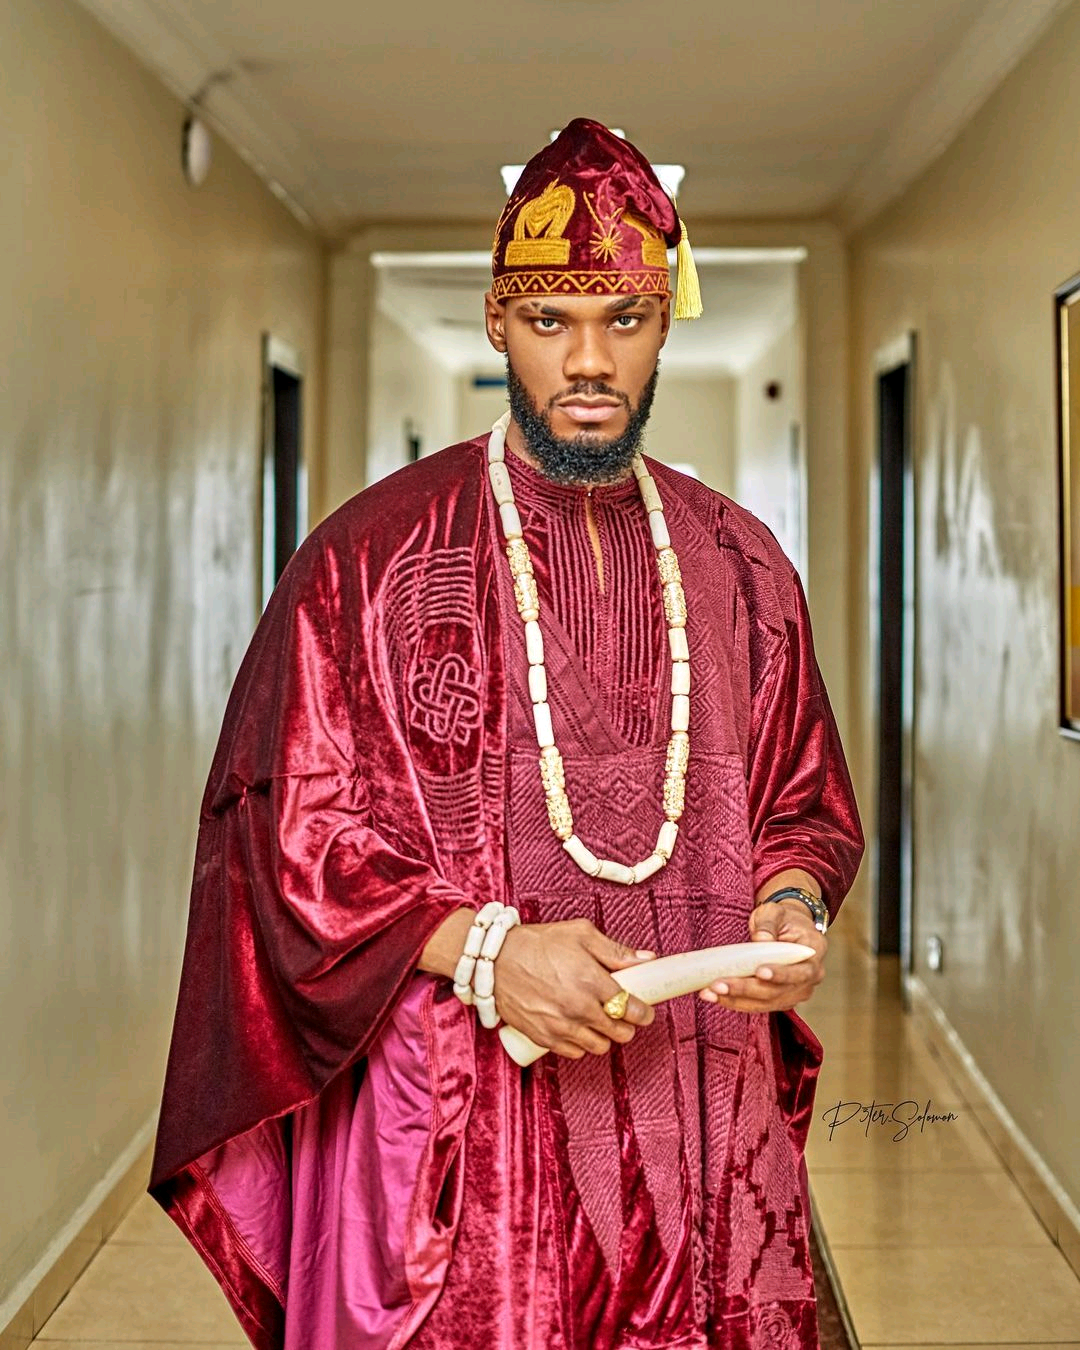 BBNaija’s Prince Receives Plot Of Land From Fans Ahead Of His Birthday